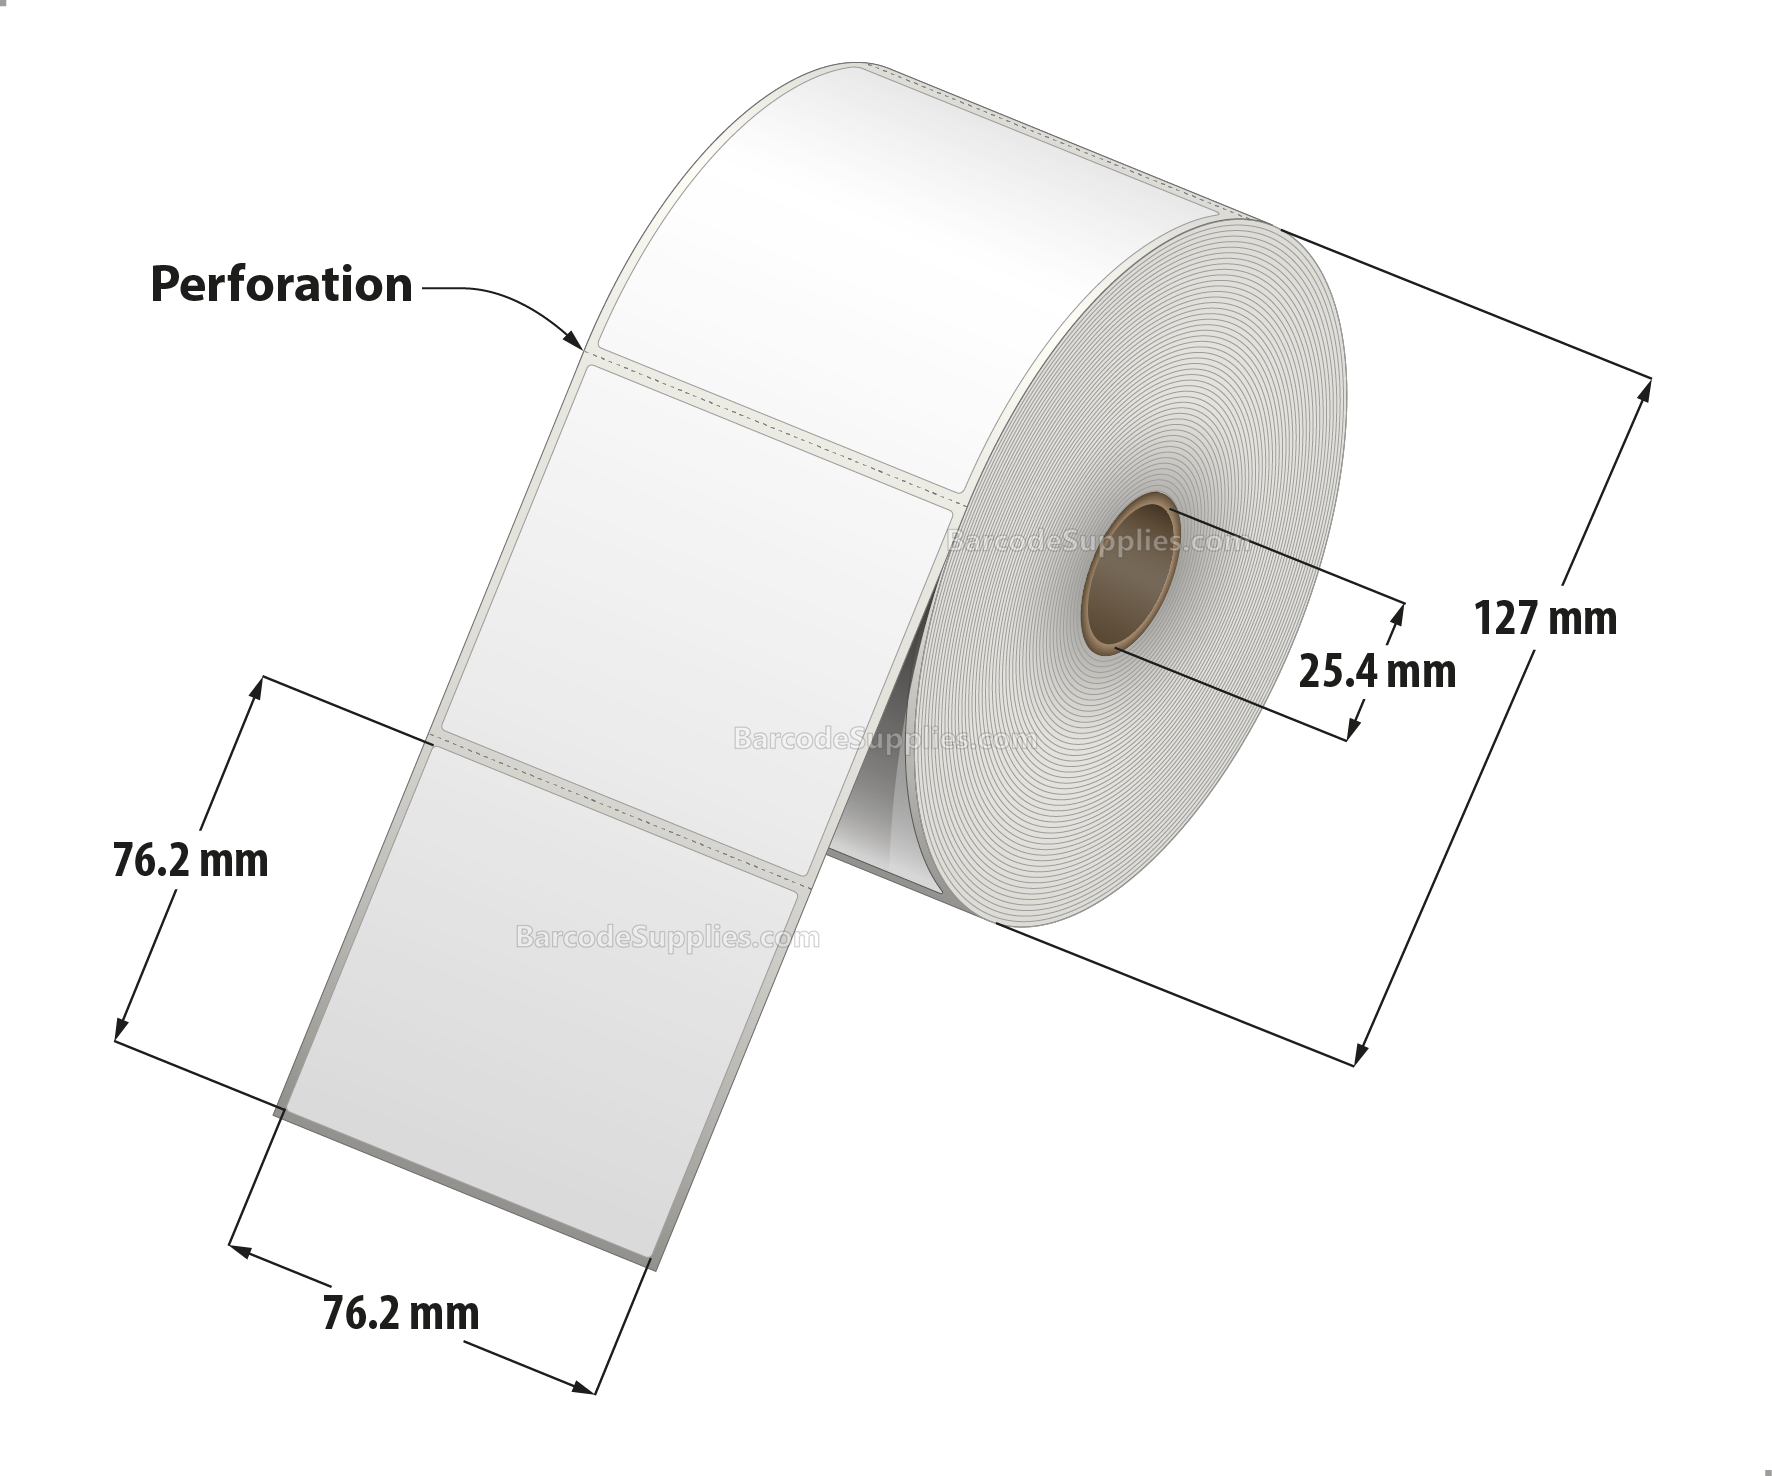 3 x 3 Thermal Transfer White Labels With Permanent Acrylic Adhesive - Perforated - 850 Labels Per Roll - Carton Of 4 Rolls - 3400 Labels Total - MPN: TH33-15PTT